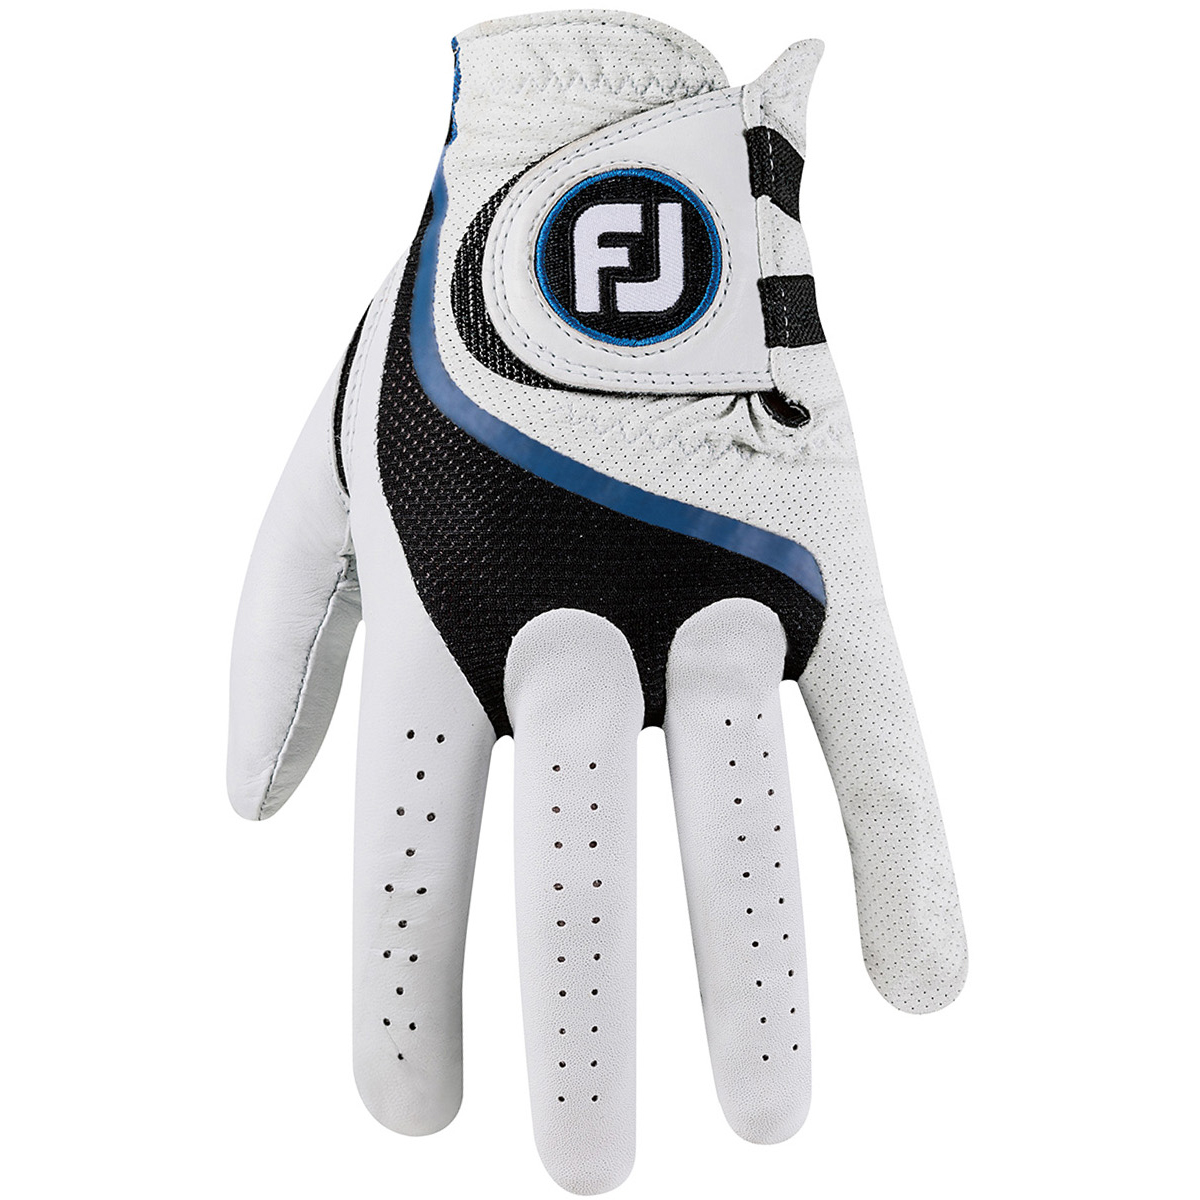 FootJoy Pro FLX Glove from american golf